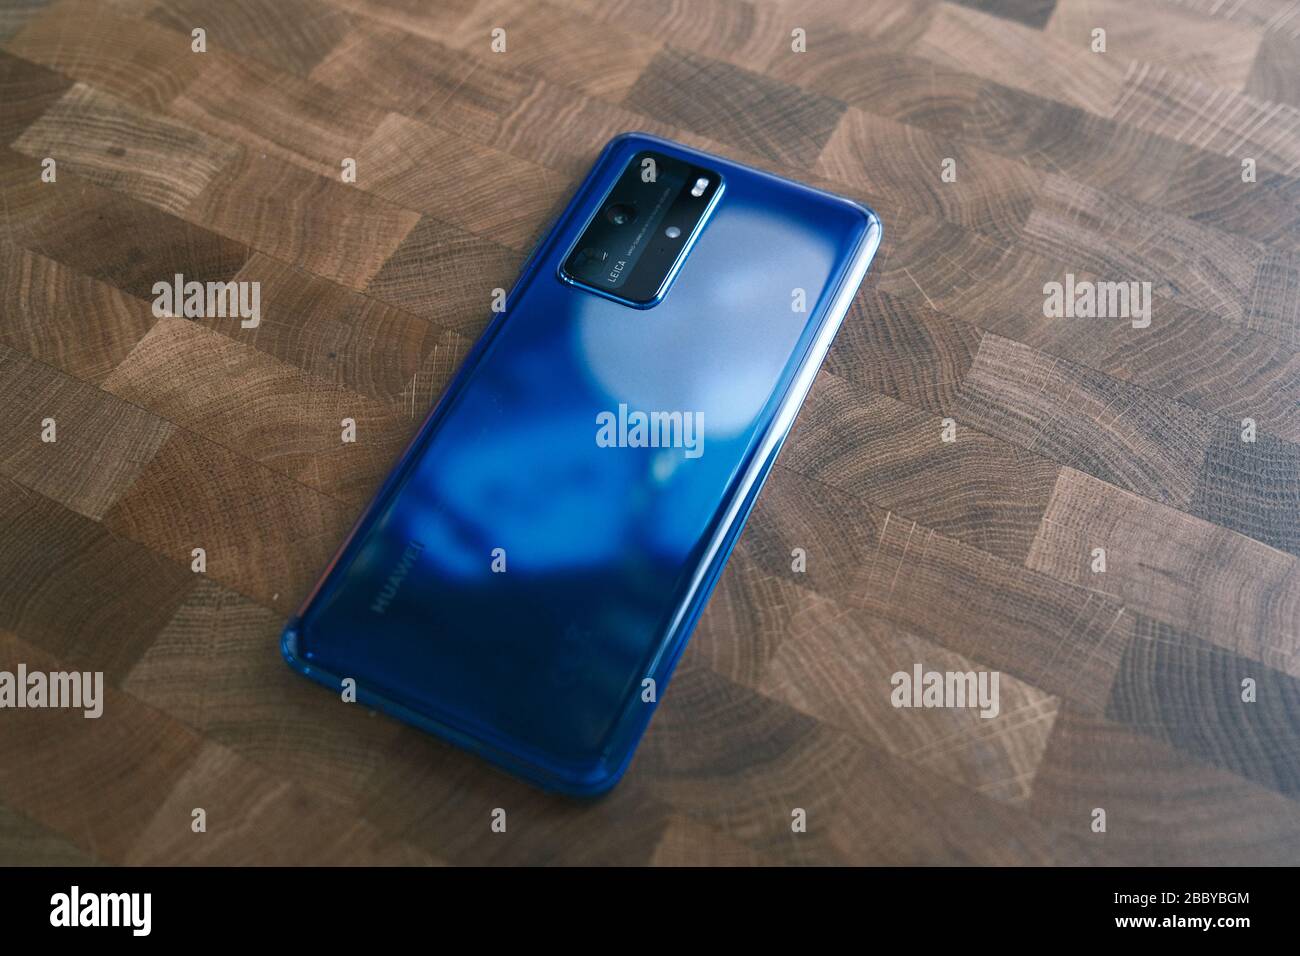 RIGA, LATVIA, MARCH 2020 - Newly launched Huawei P40 Pro smartphone is displayed for editorial purposes Stock Photo